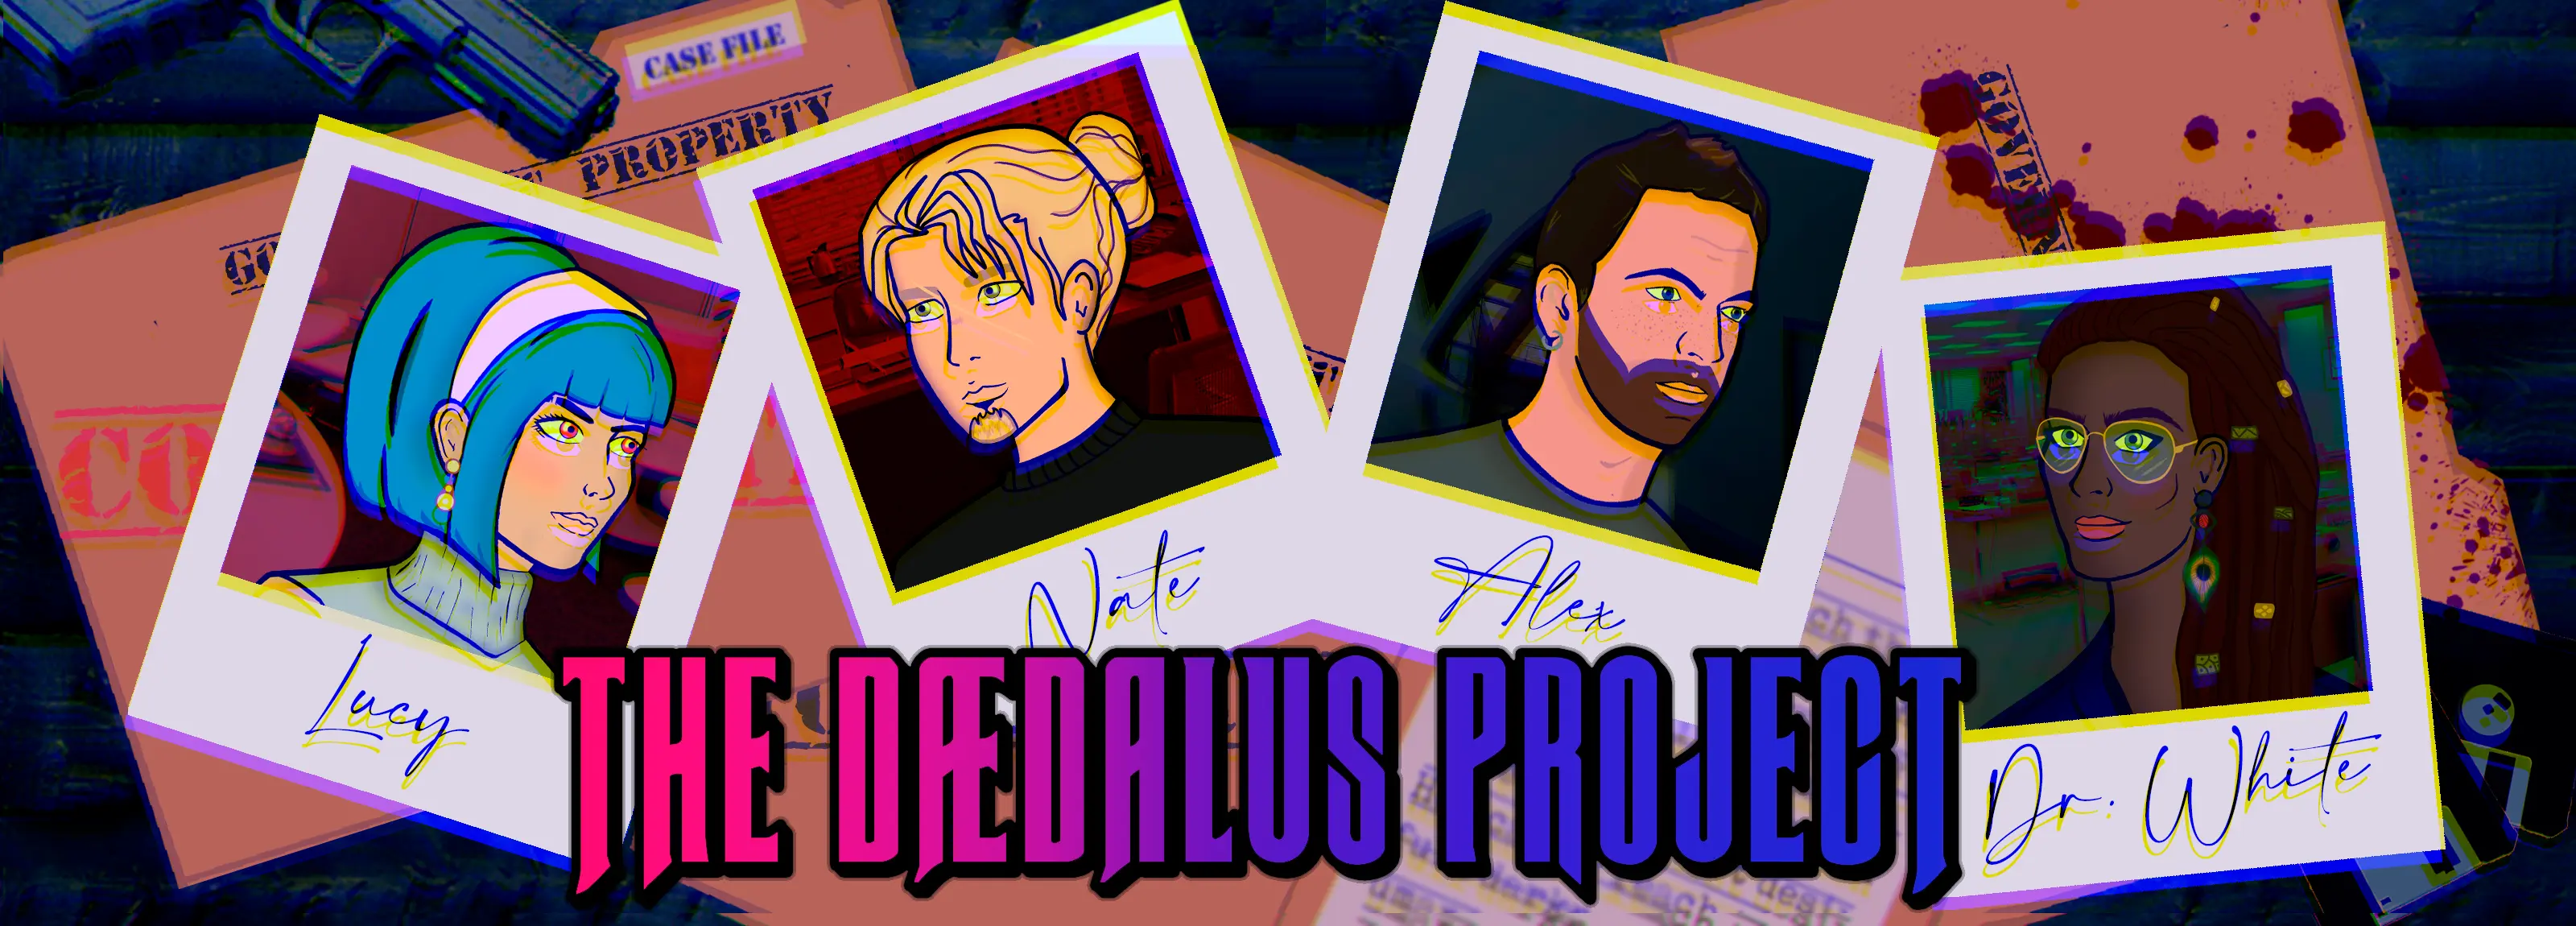 THE DAEDALUS PROJECT main image